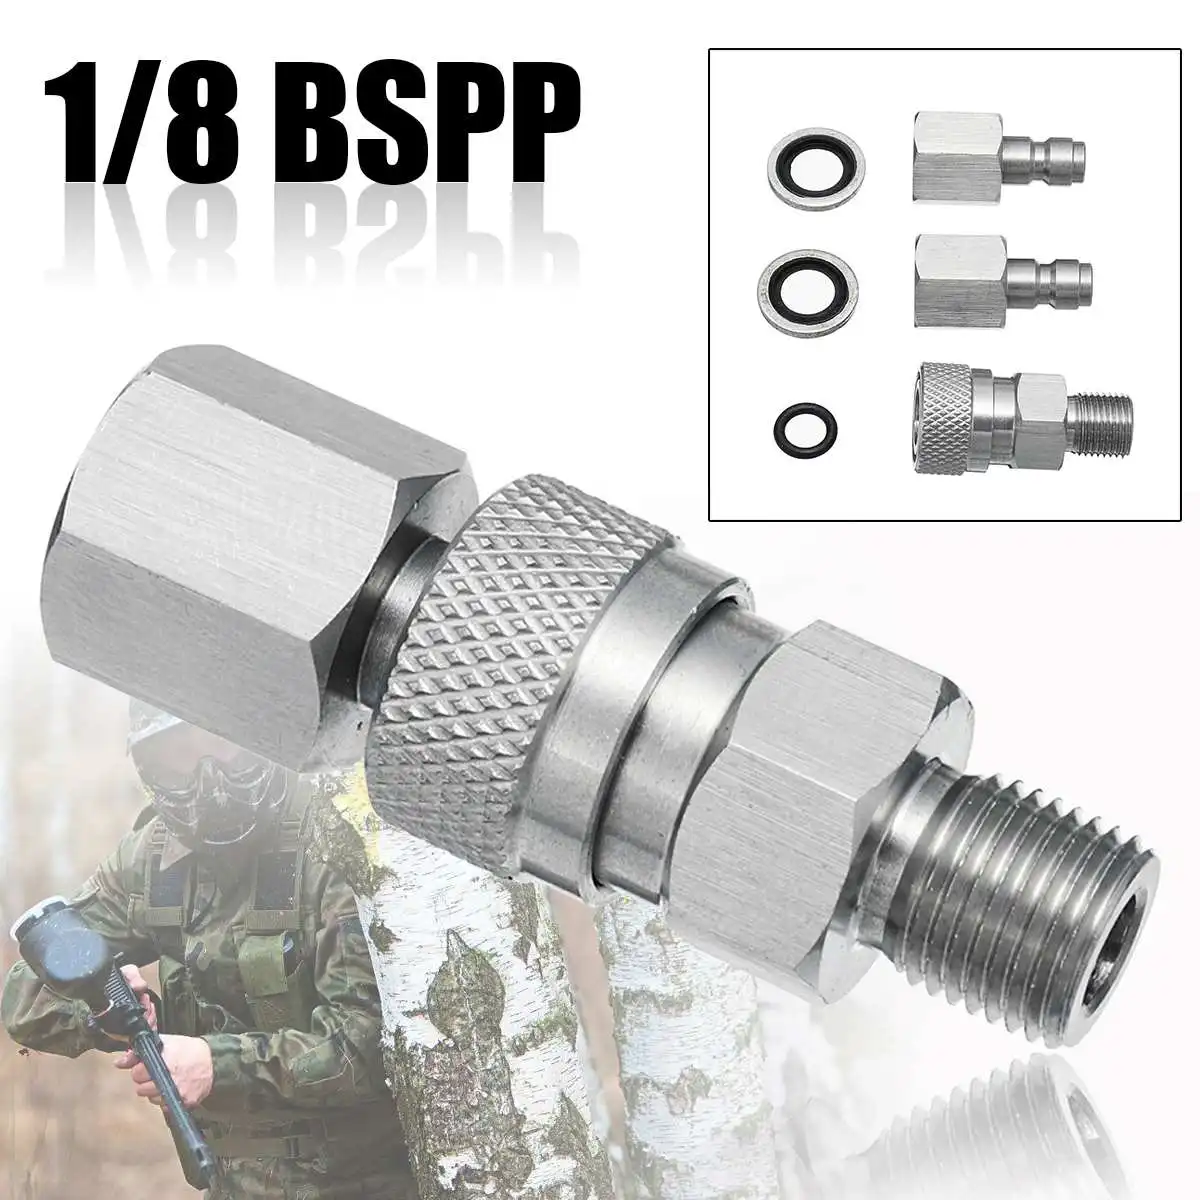 Gu n Filling Quick Connect Adapter Stainless PCP 1/8 BSPP with Plugs Fitting Connector Coupler for Toy Gu n|Toy Guns|   - AliExpress